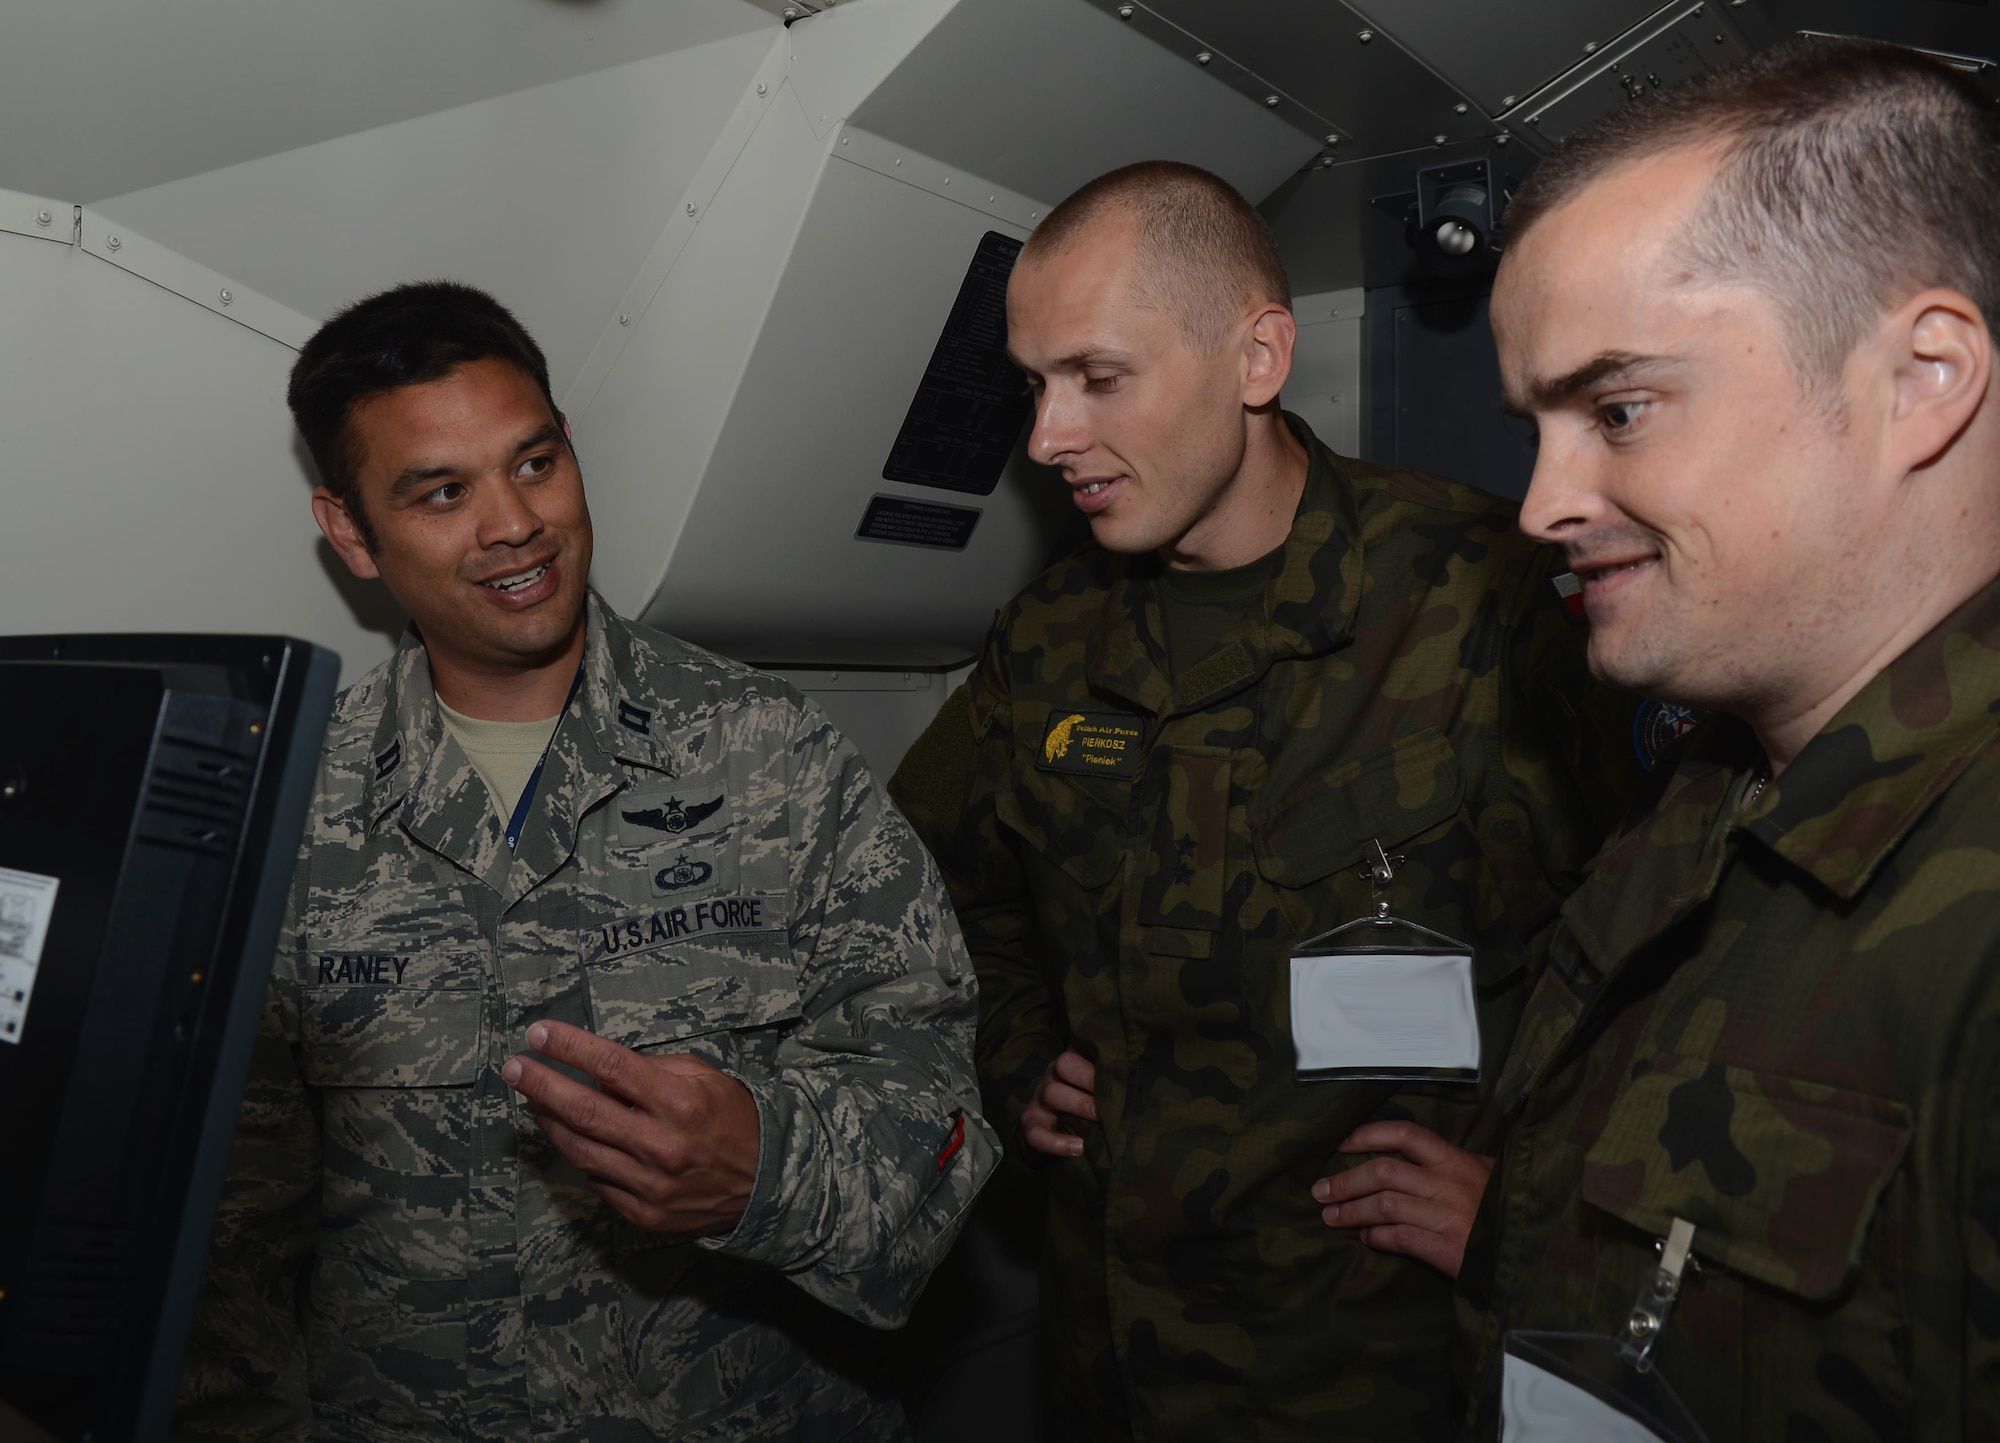 U.S. Air Force Capt. Adam Raney, left, 606th Expeditionary Air Control Squadron mission support director from Tampa, Fla., demonstrates control tactics to two Polish air force service members June 12, 2014, at Powidz Air Base, Poland. The 606th EACS is primarily supporting EAGLE TALON, a Polish-led multinational exercise, to increase interoperability with air-to-air and air-to-surface training involving Polish, U.S., French, British and NATO aircraft. (U.S. Air Force photo/Airman 1st Class Kyla Gifford/Released)